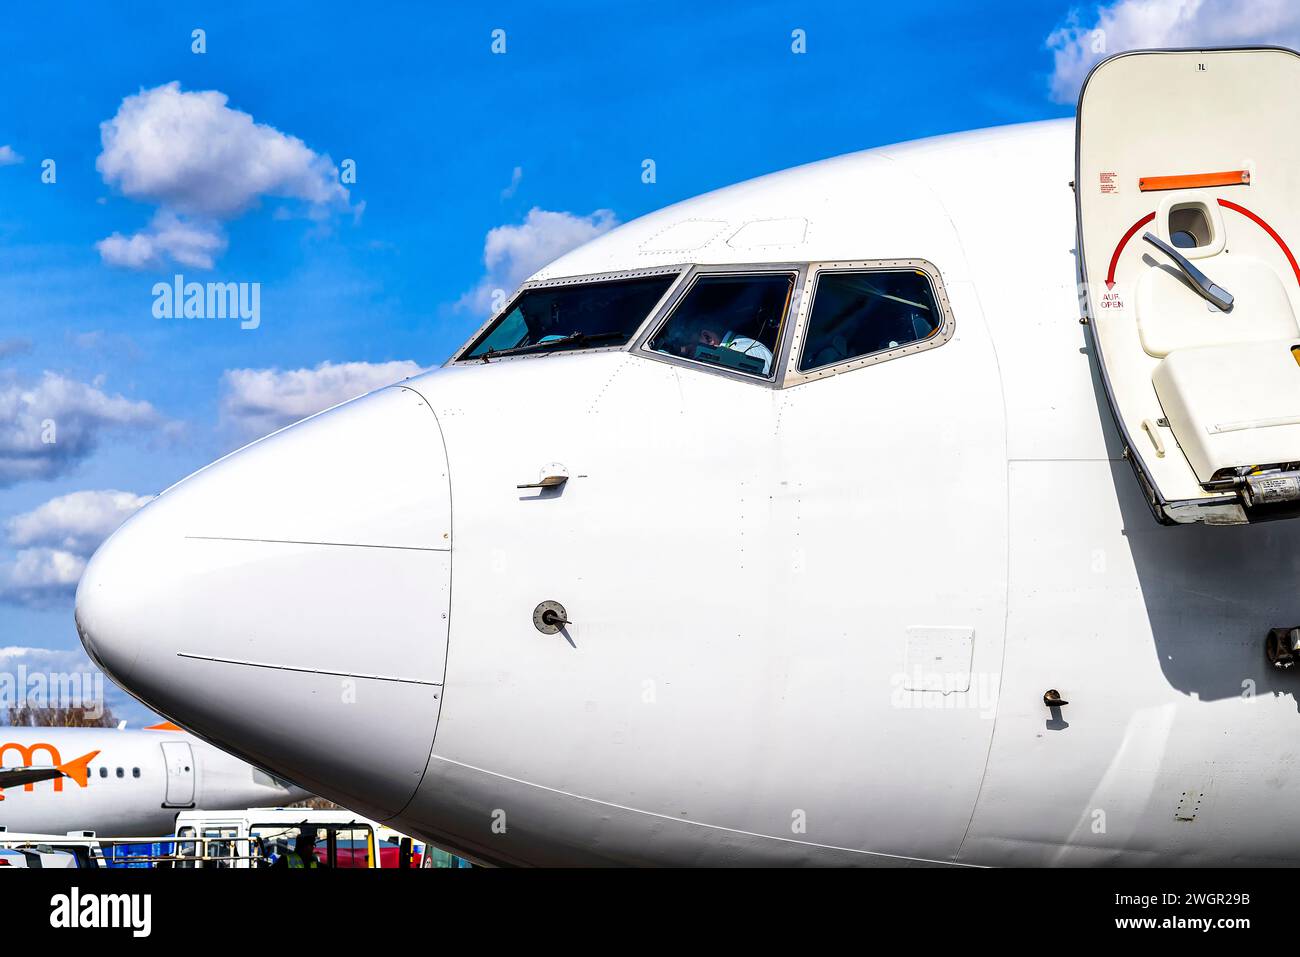 detail of a private jet parked at the airport Stock Photo